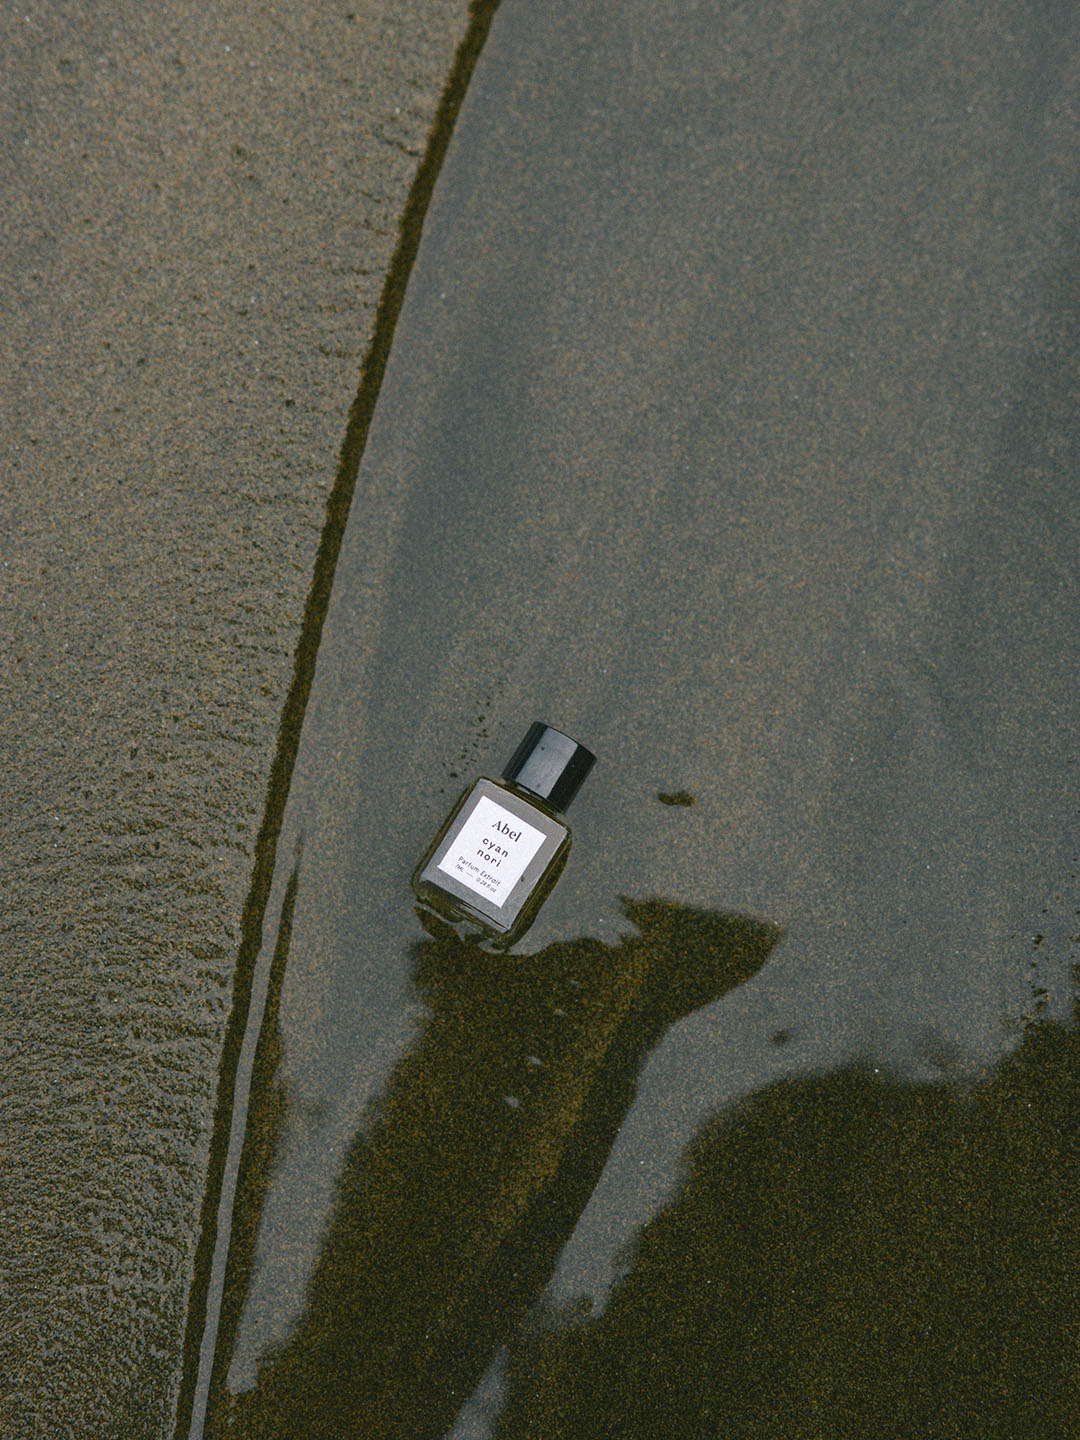 A bottle of Cyan Nori Parfum Extrait – for joy, made by Abel with therapeutic-grade essential oils, sitting in the sand.